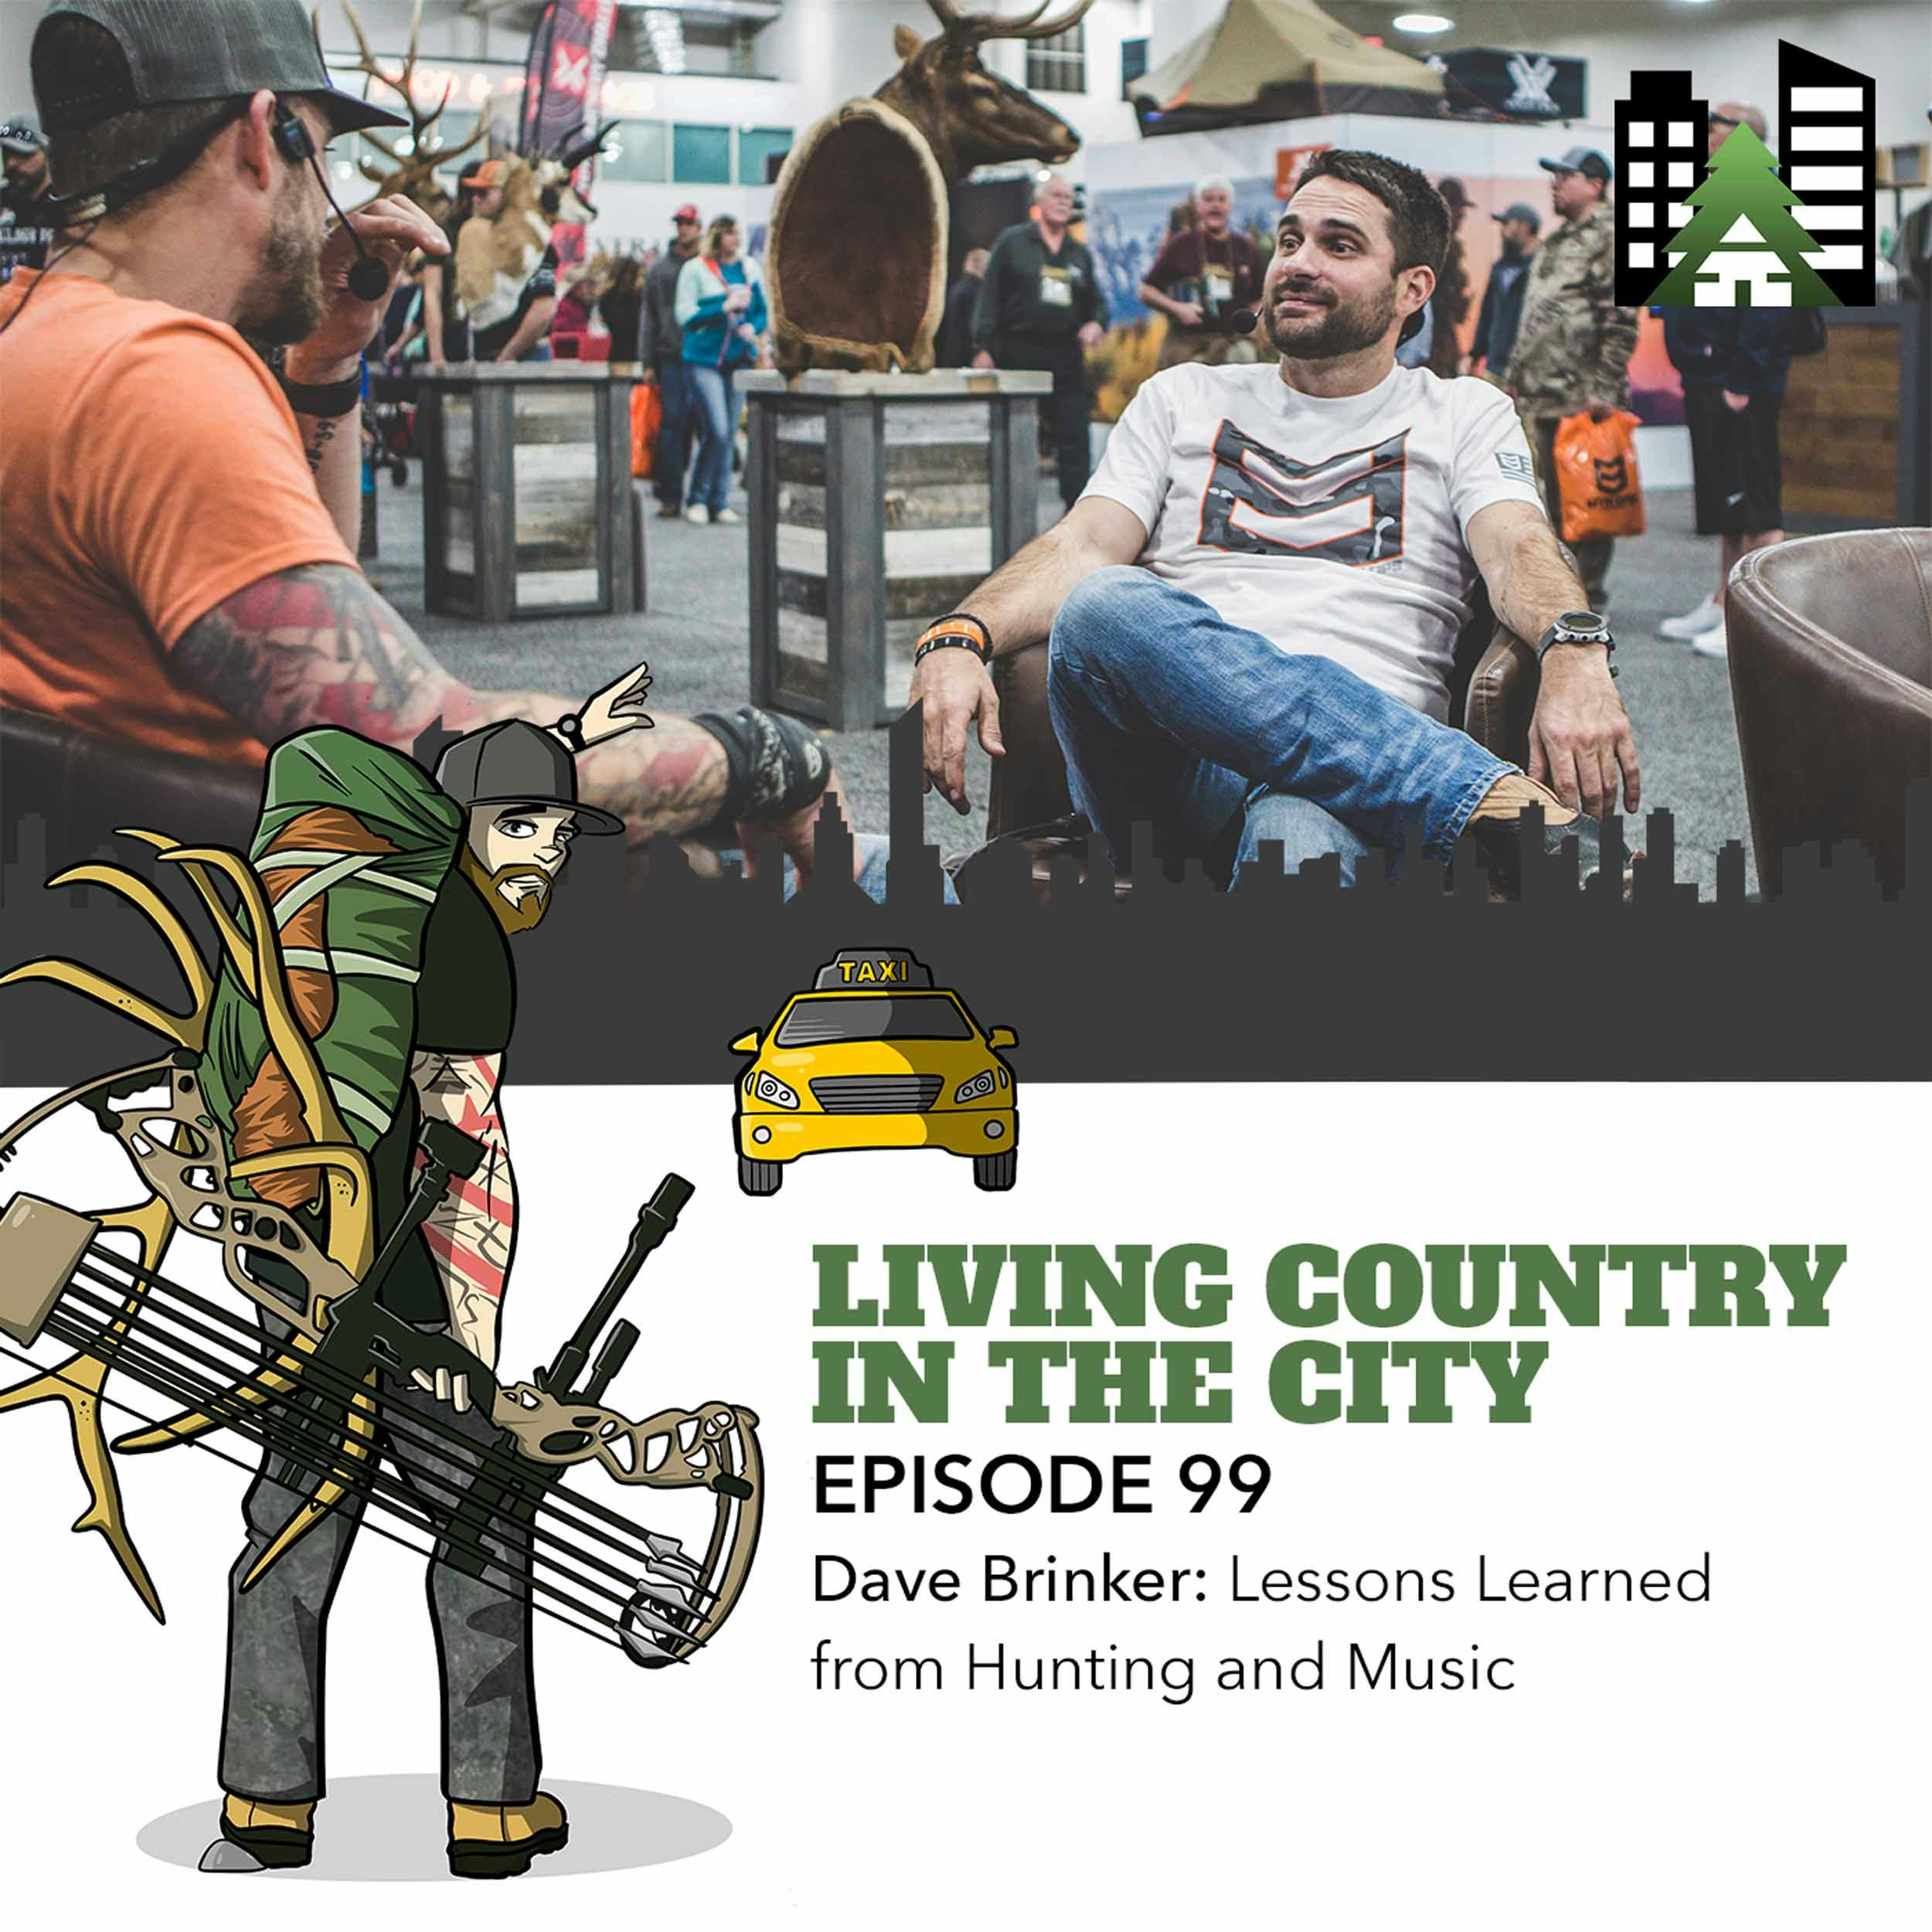 Ep 99 - Dave Brinker: Lessons Learned from Hunting and Music